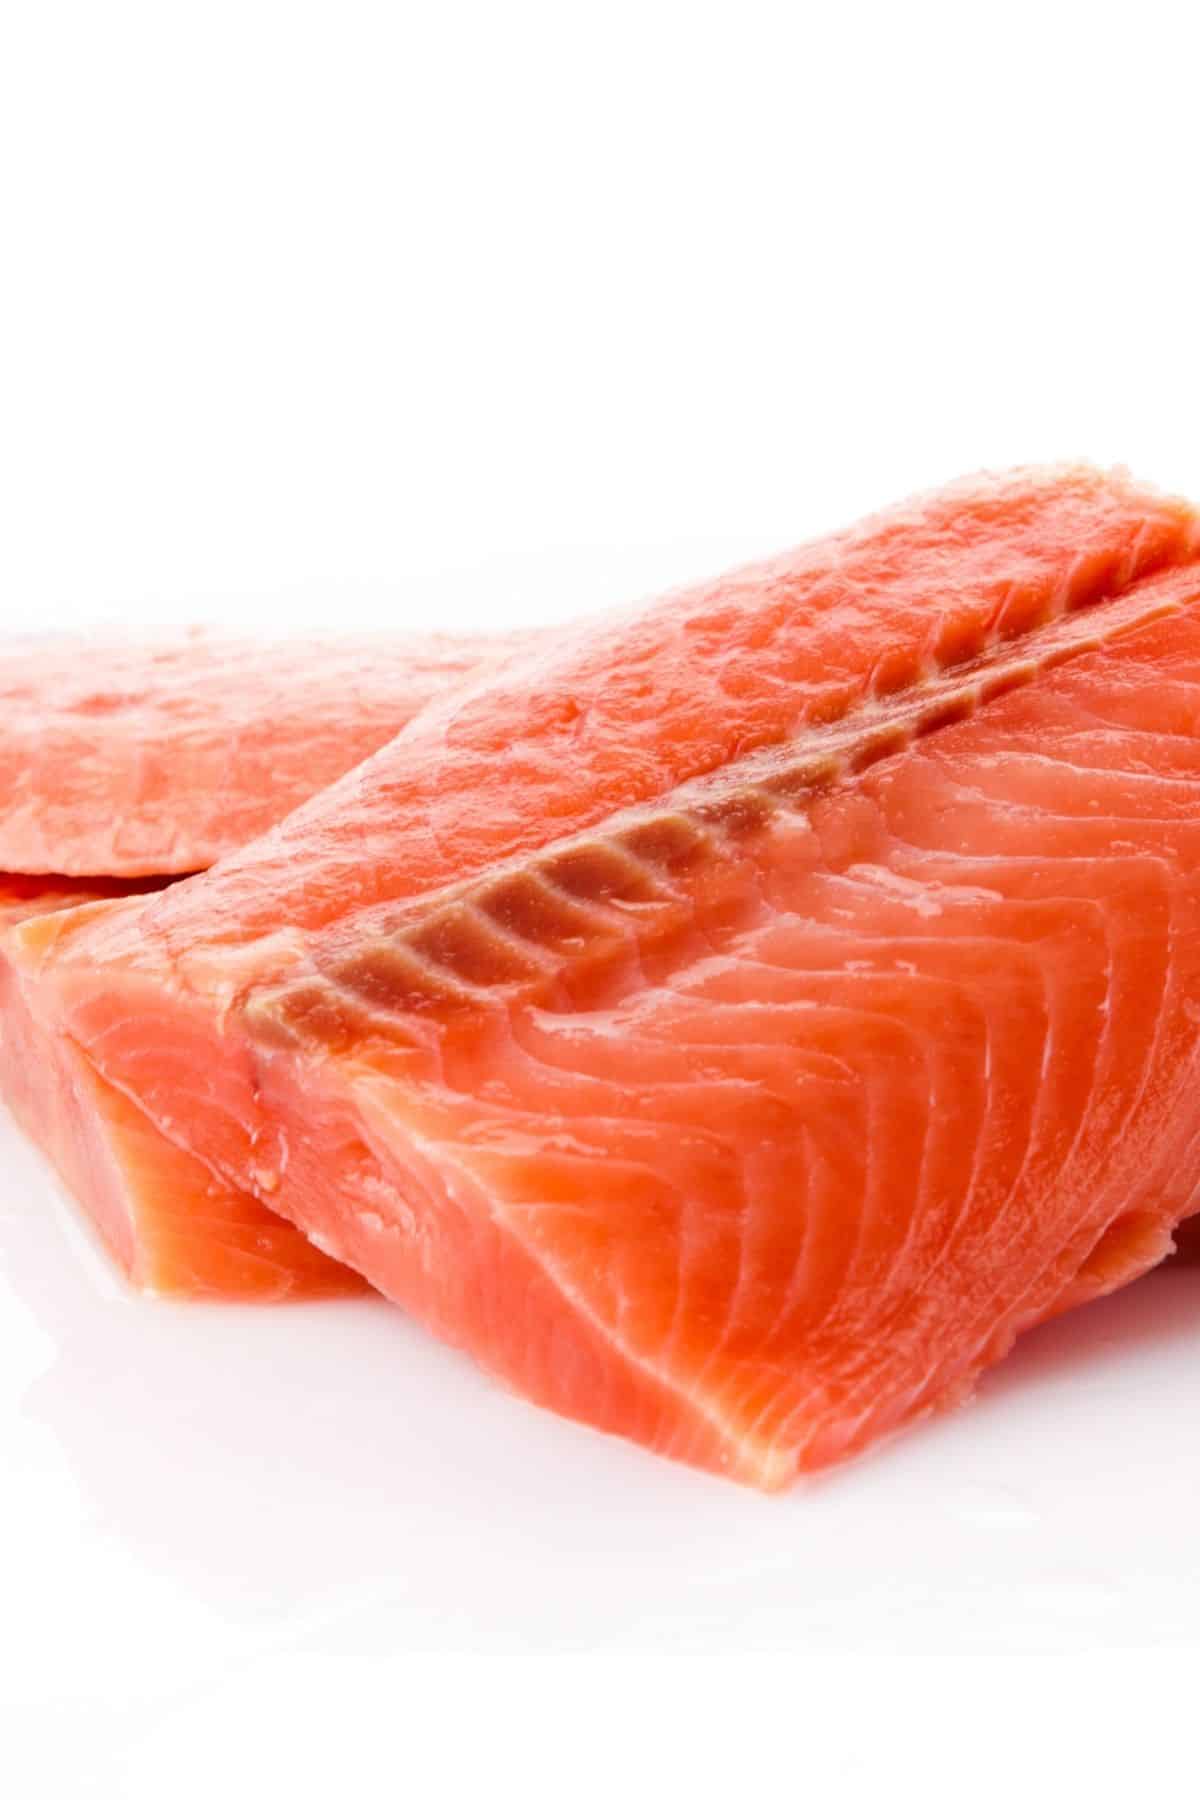 Raw salmon fillets on a white surface.